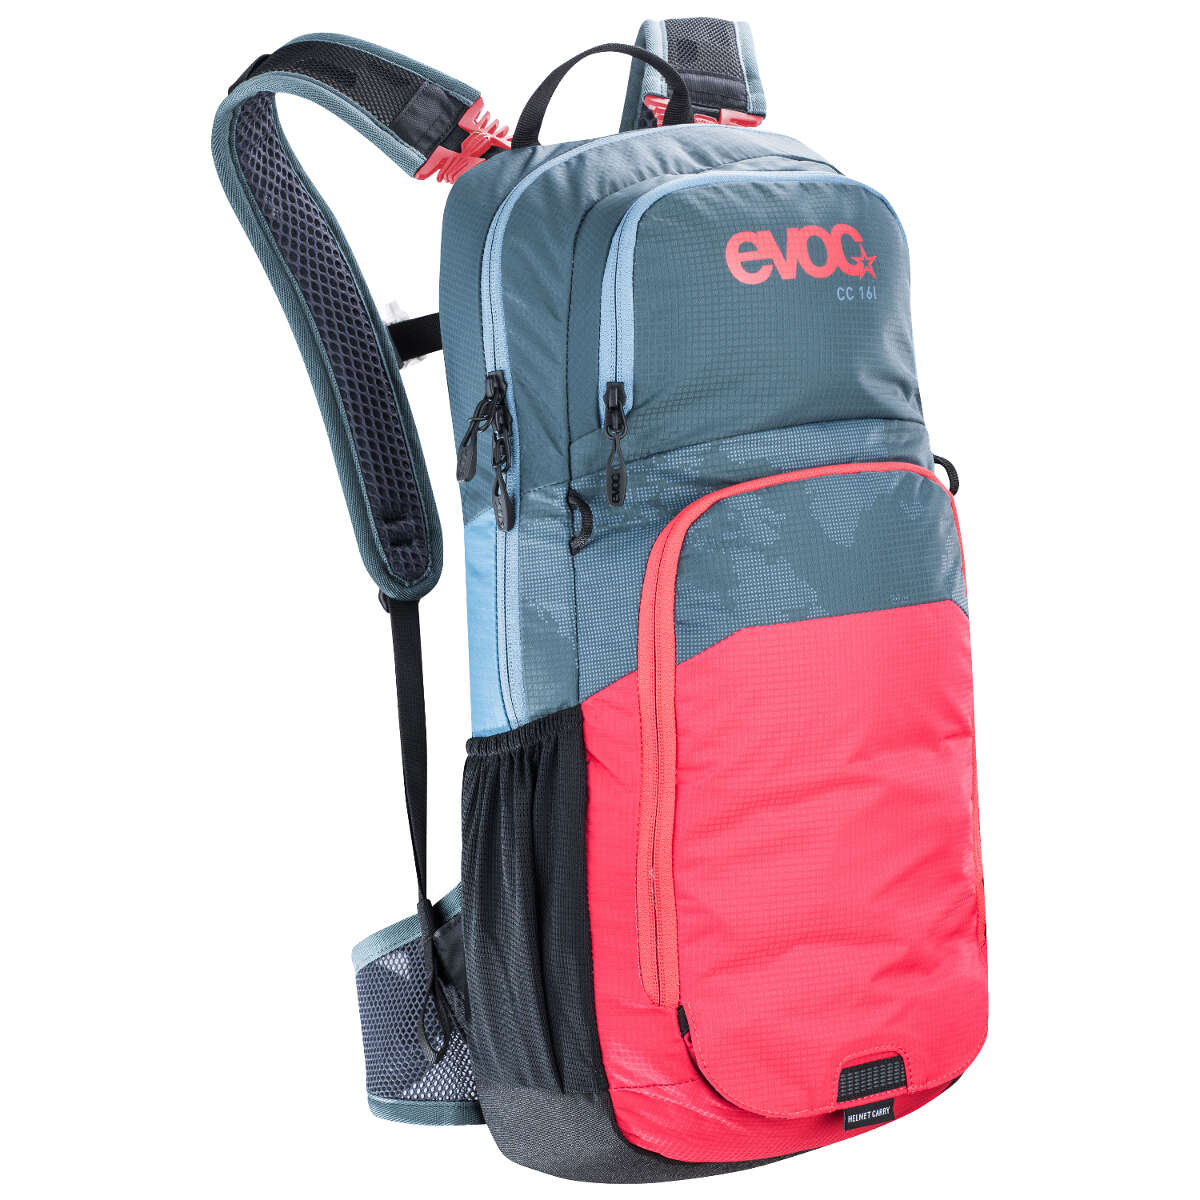 Evoc Backpack with Hydration System Compartment Cross Country Slate Red, 16 Liter